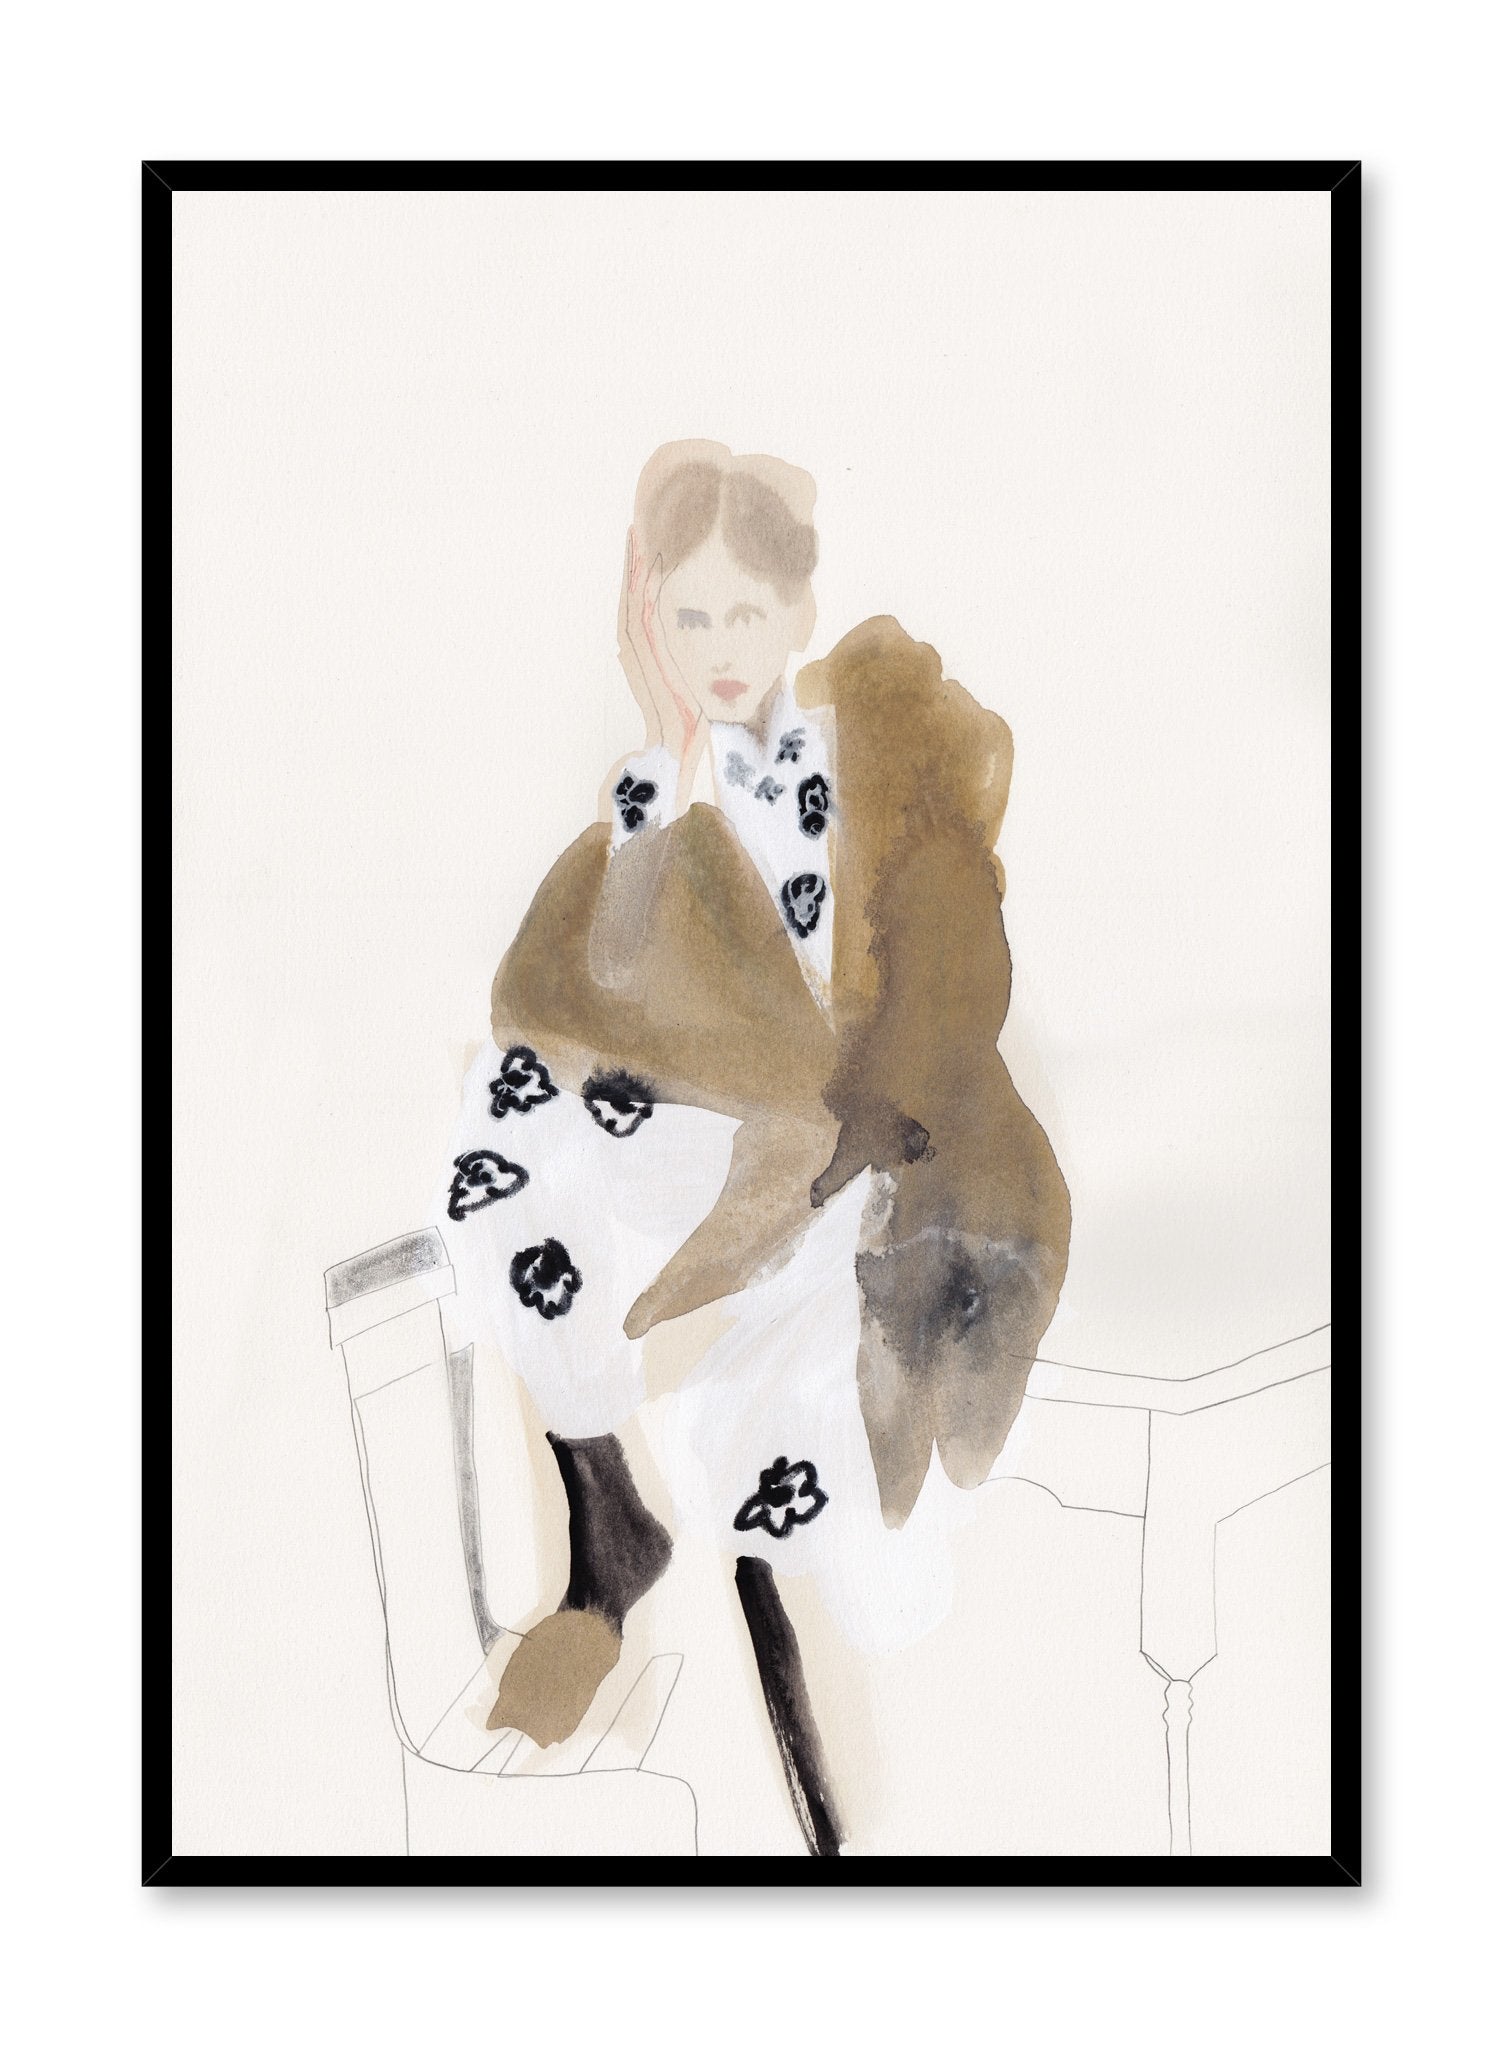 Fashion painting by Opposite Wall of a woman sitting on a kitchen table wearing a black and white floral dress and a brown fur coat.